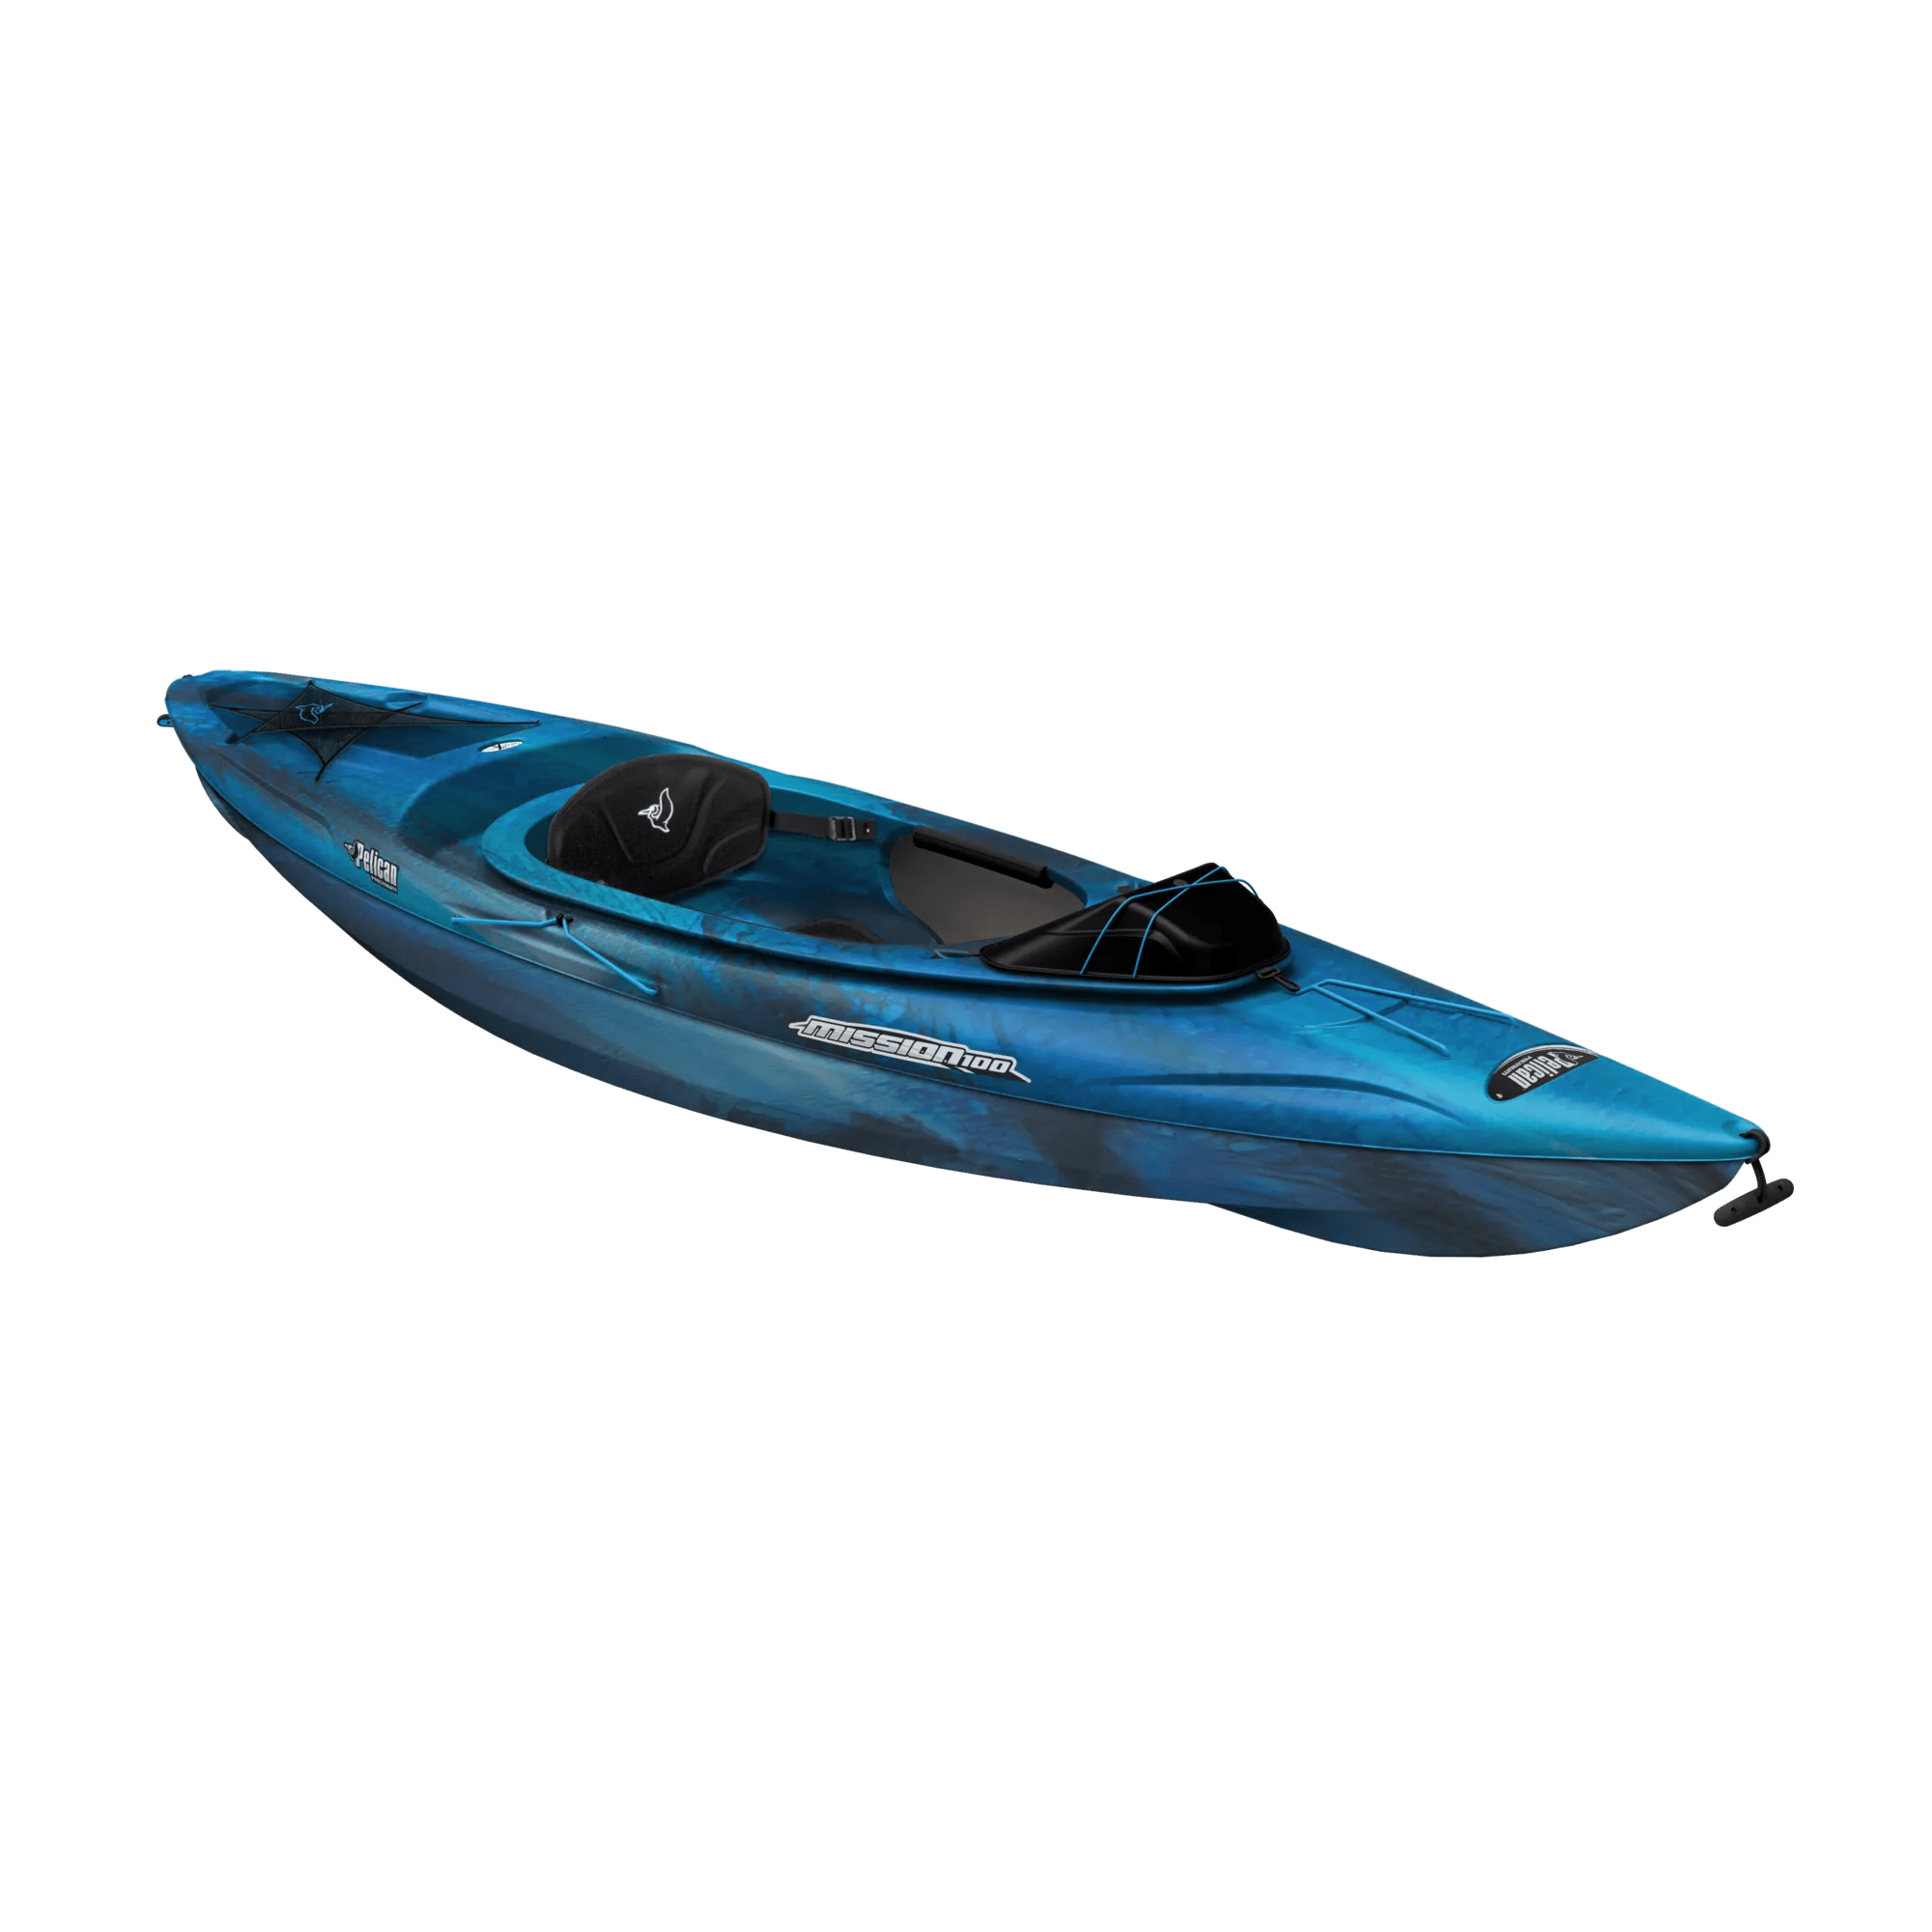 PELICAN - Mission 100 Kayak with Paddle - Blue - KAP10P100-00 - ISO